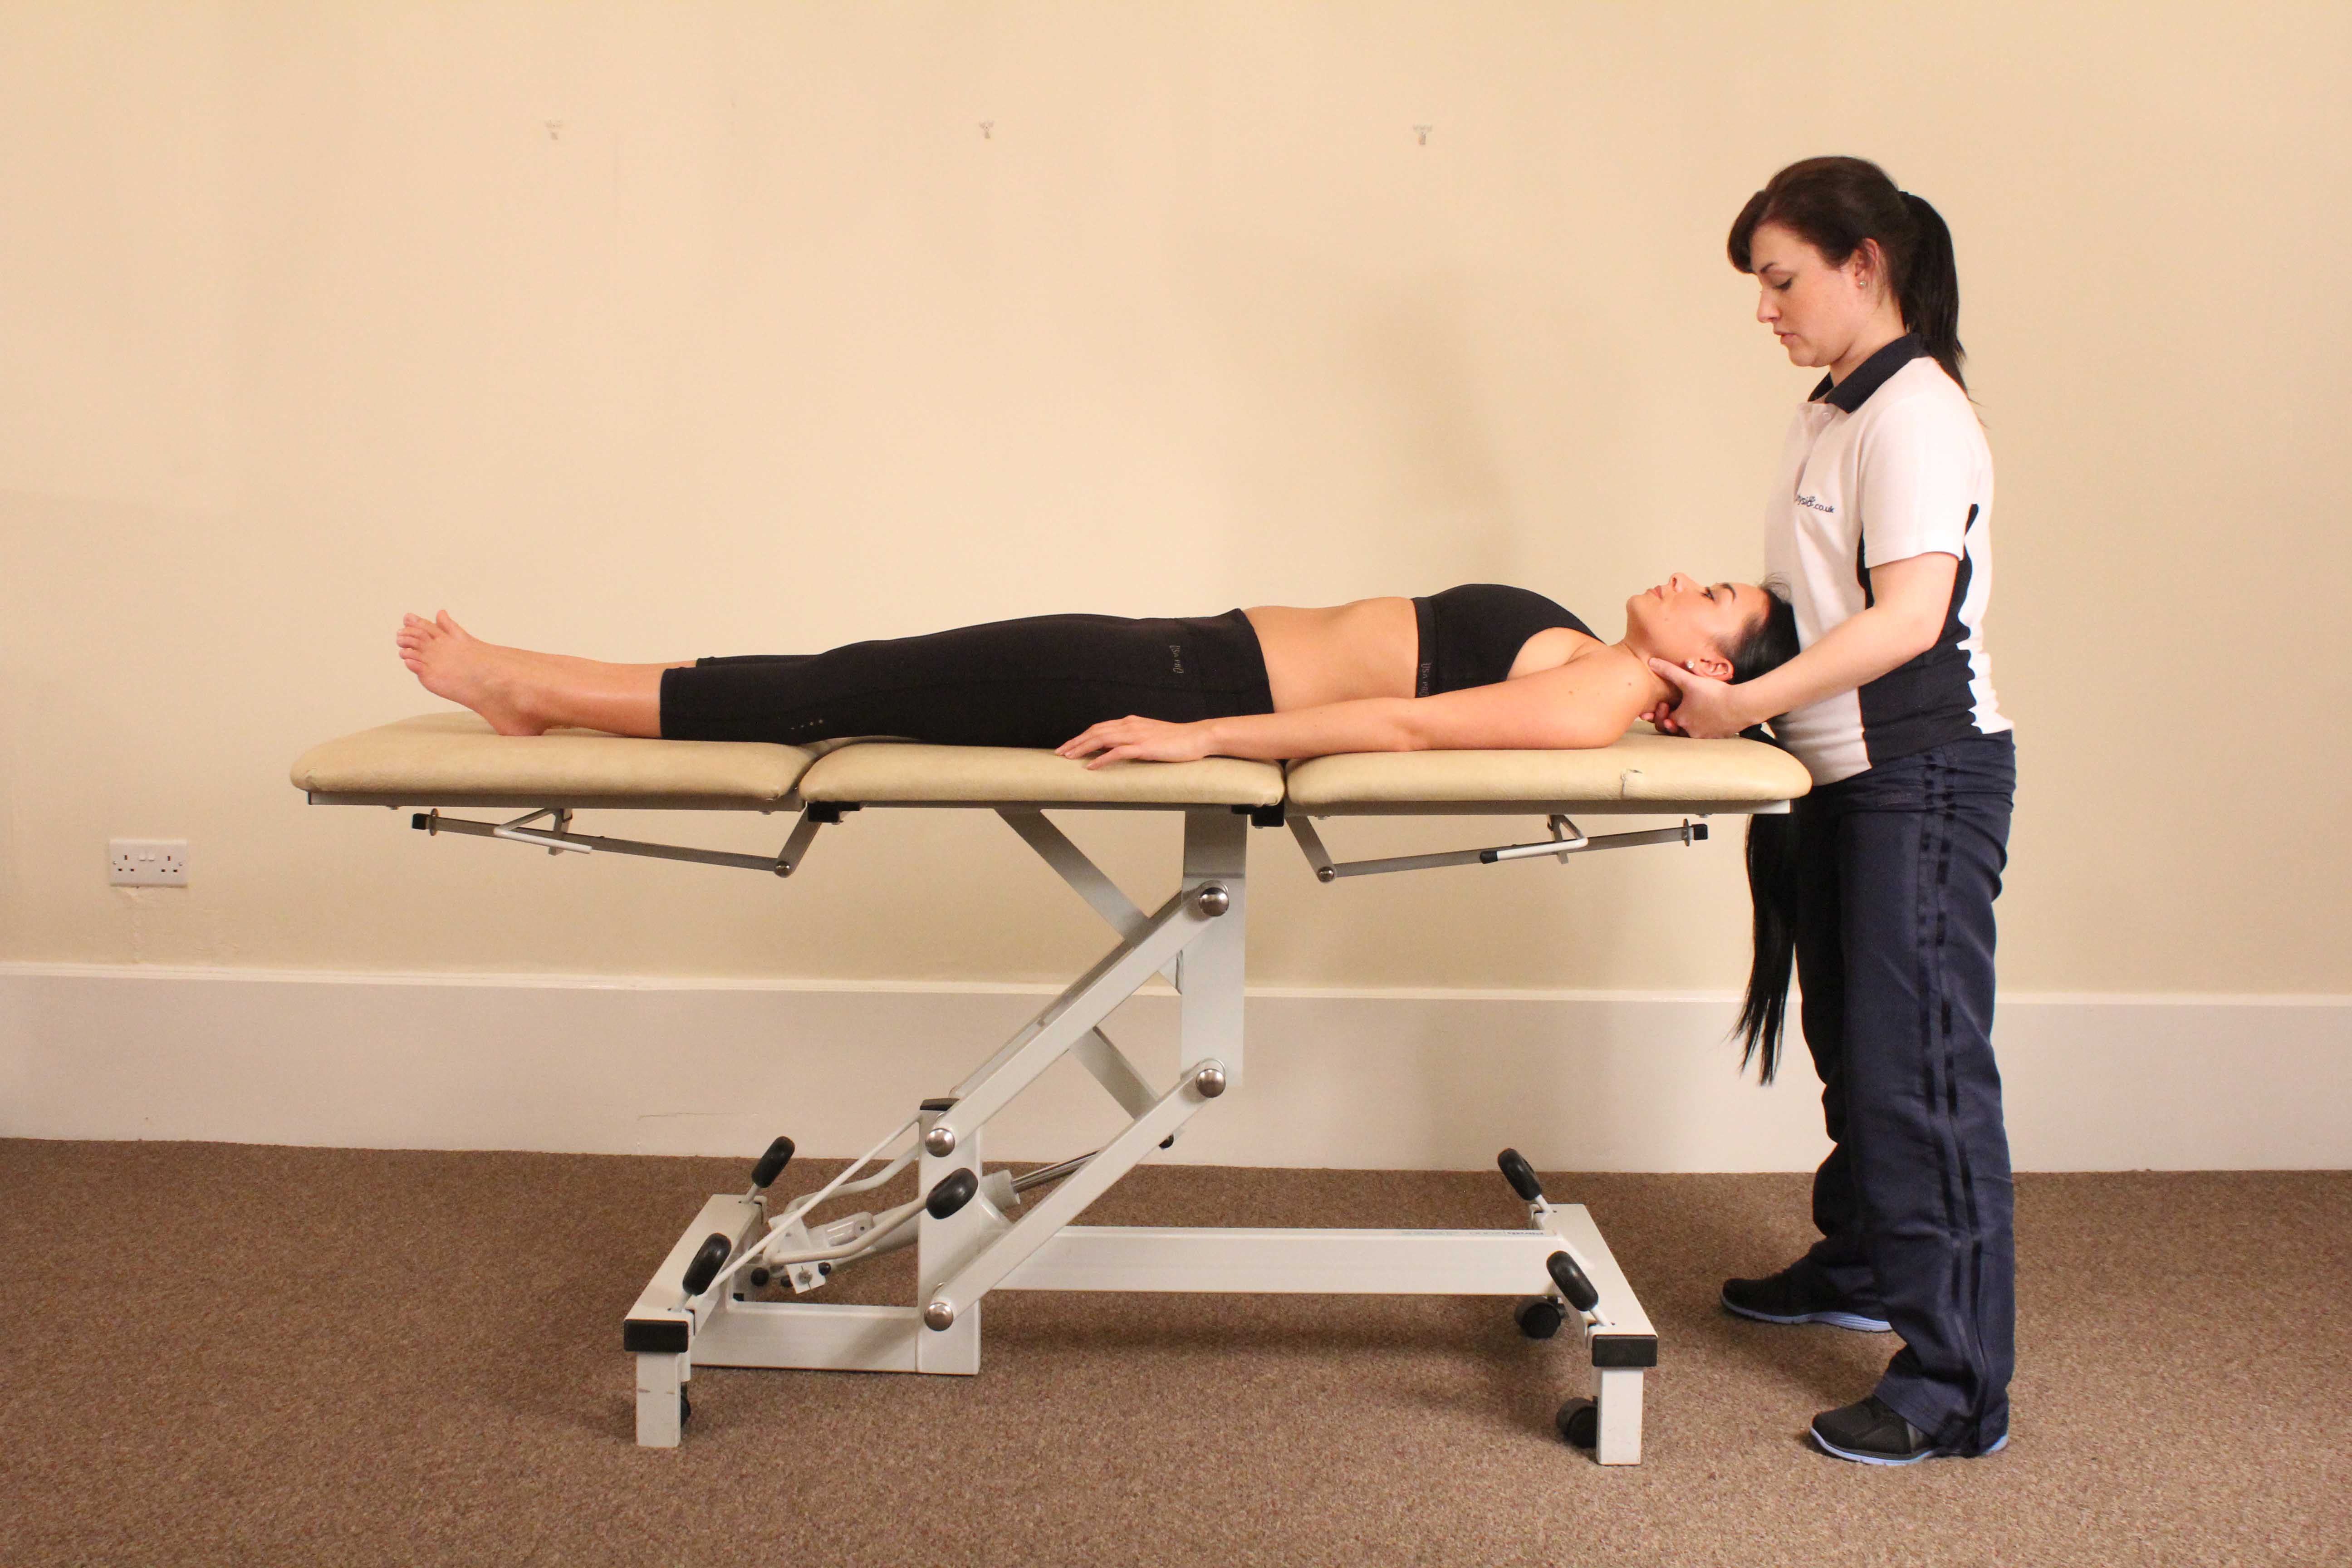 Mobilisations of the vertebrea in the cervical spine to reduce pain and stiffness